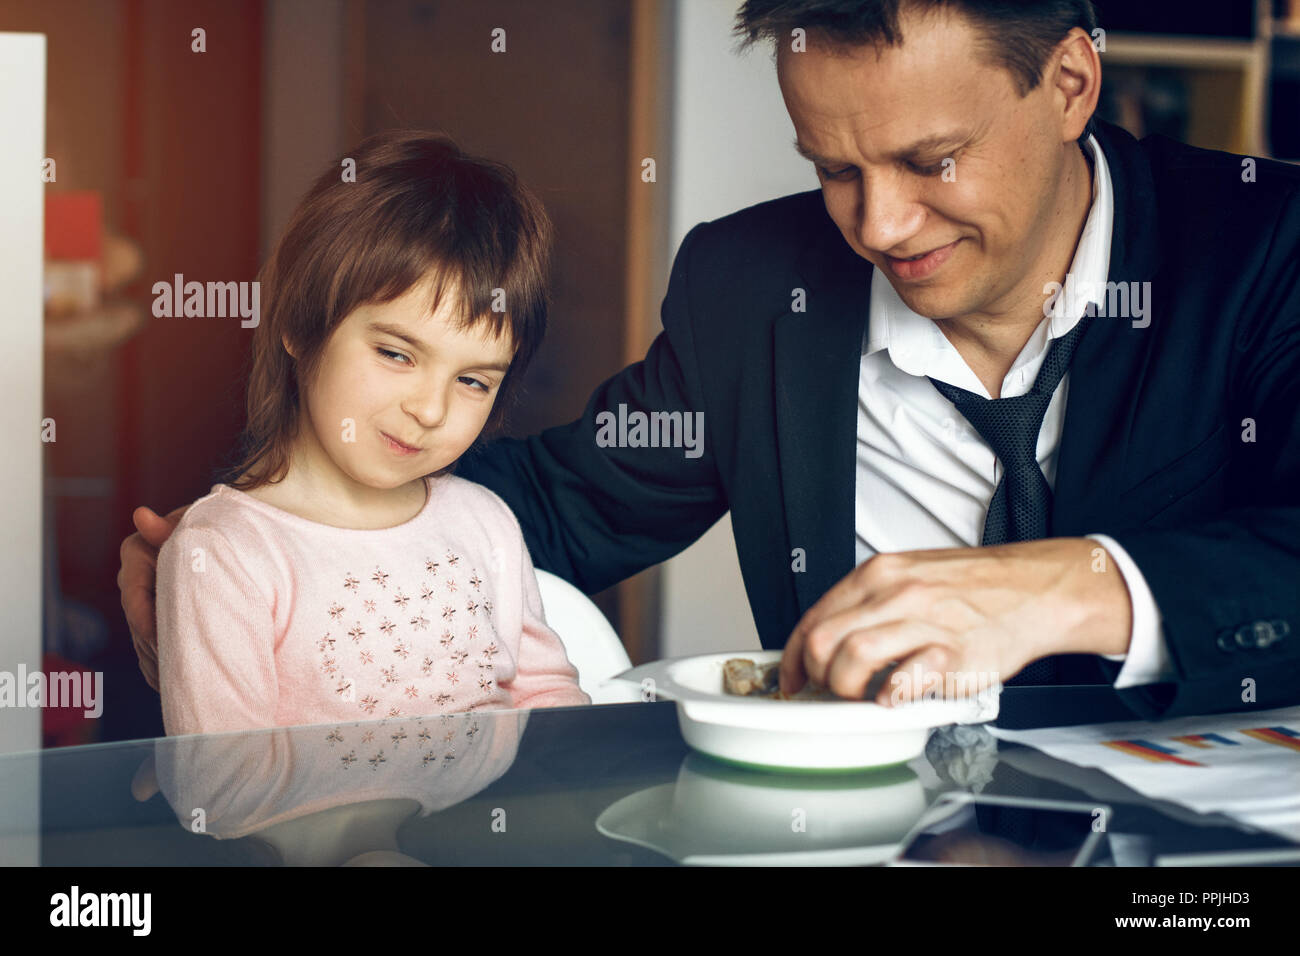 Father in suit working with papers and feeding daughter Stock Photo